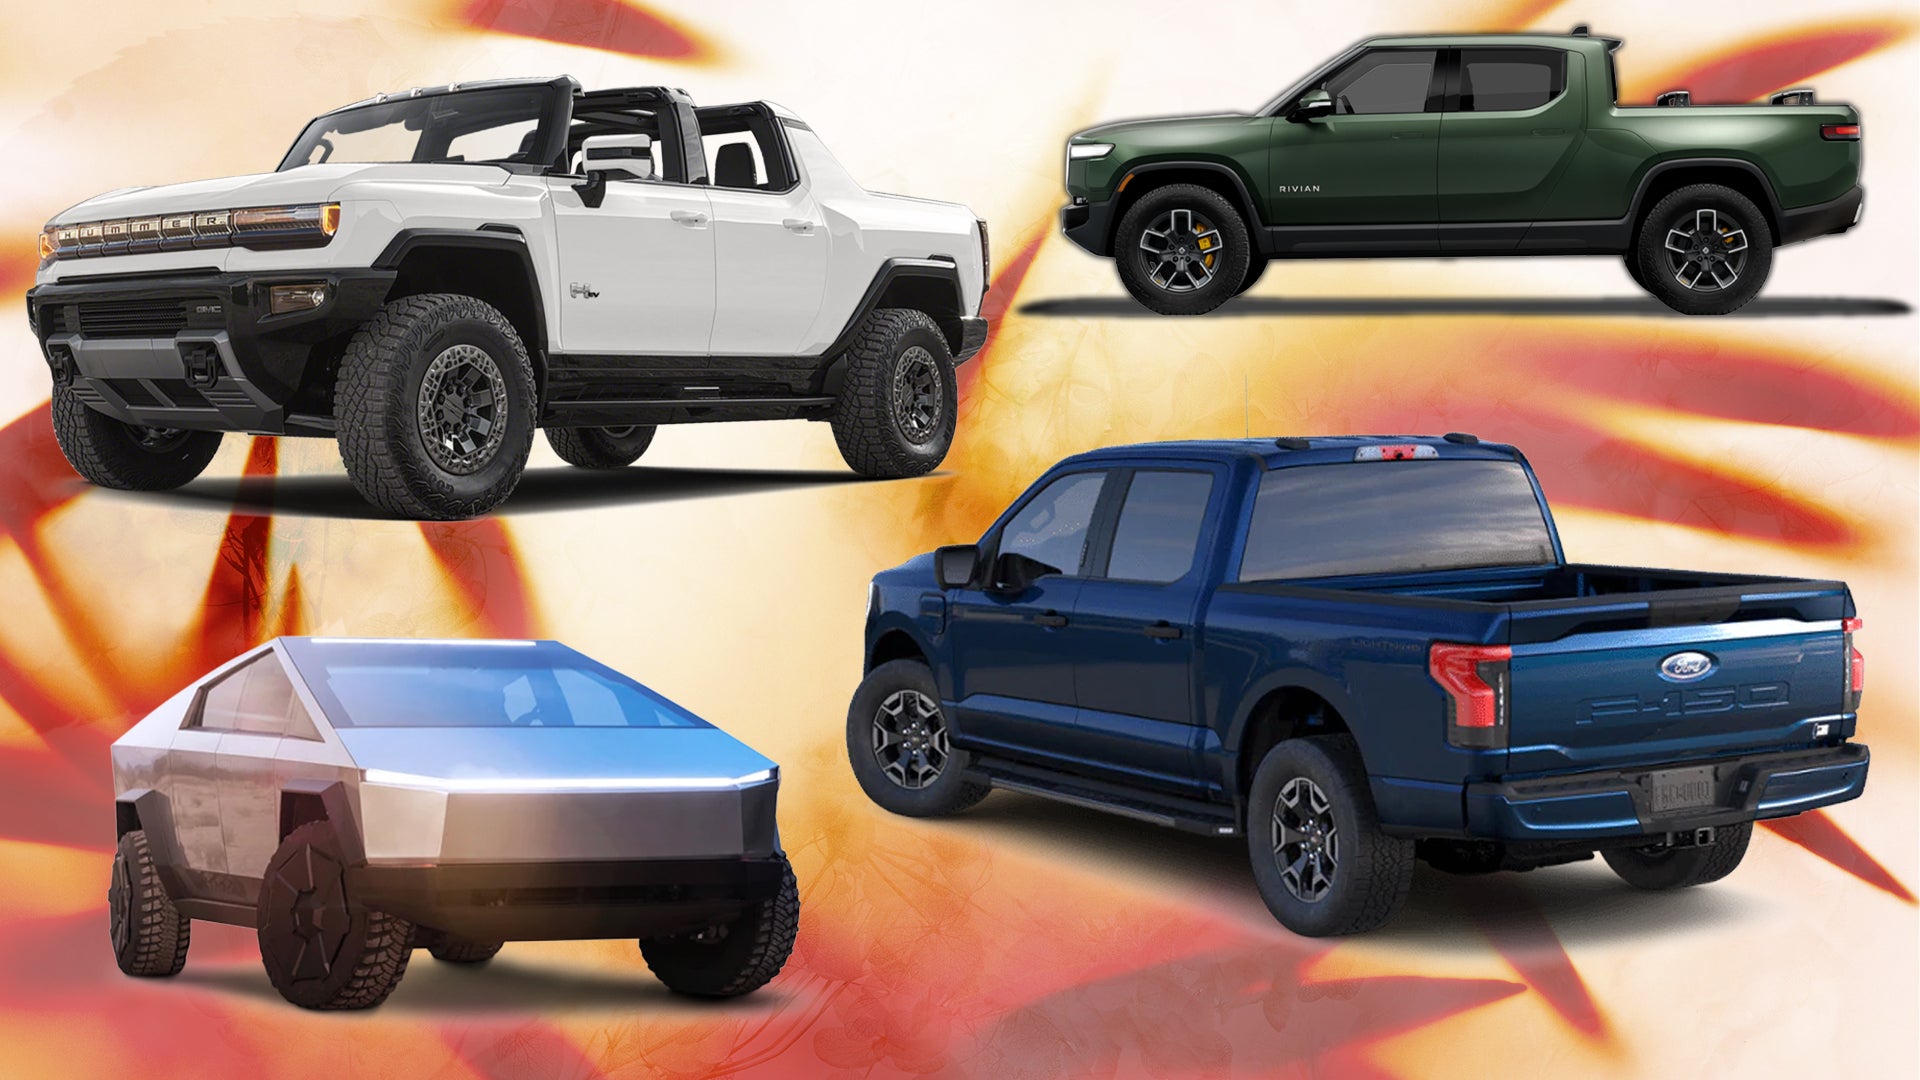 You can't throw a steel ball these days without smashing the windows of a splashy new electric truck. The Ford F-150 Lightning, the Rivian R1T, the GM